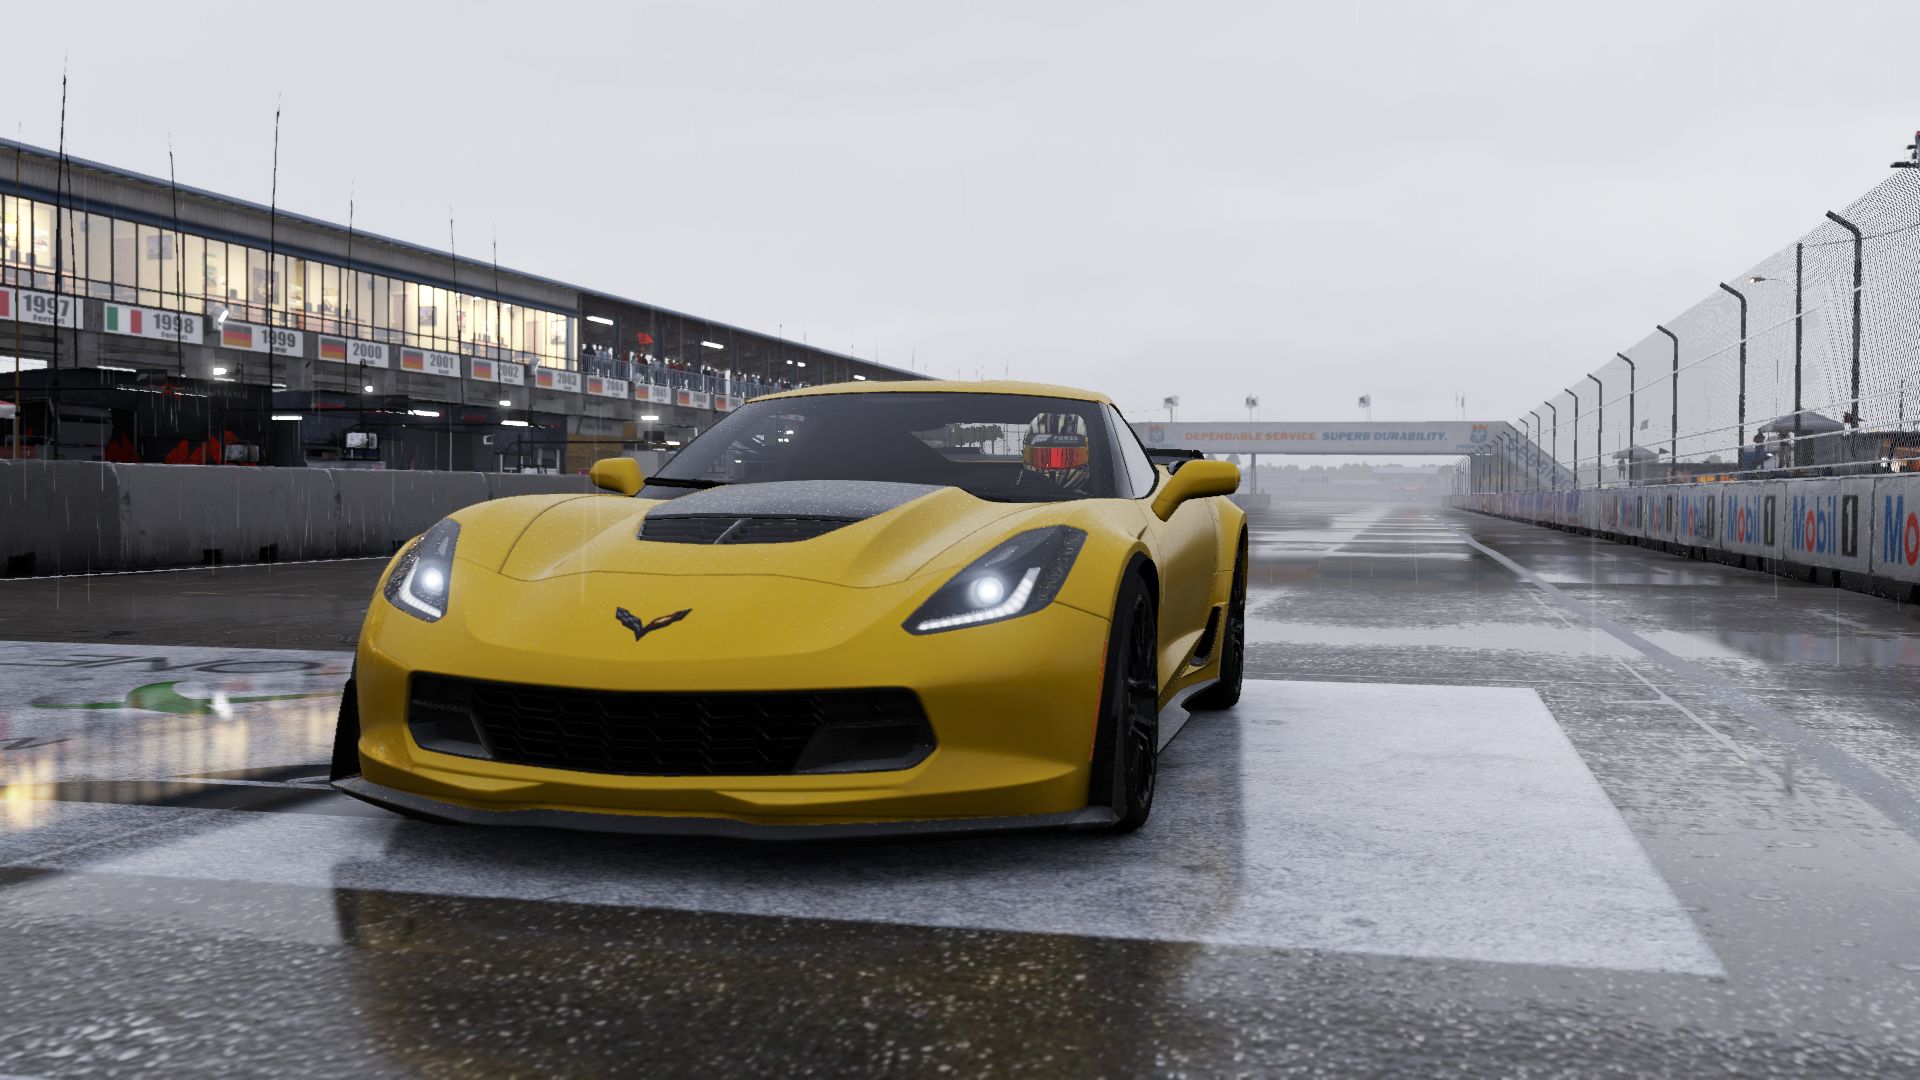 Free download wallpaper Forza Motorsport 6, Forza, Video Game on your PC desktop